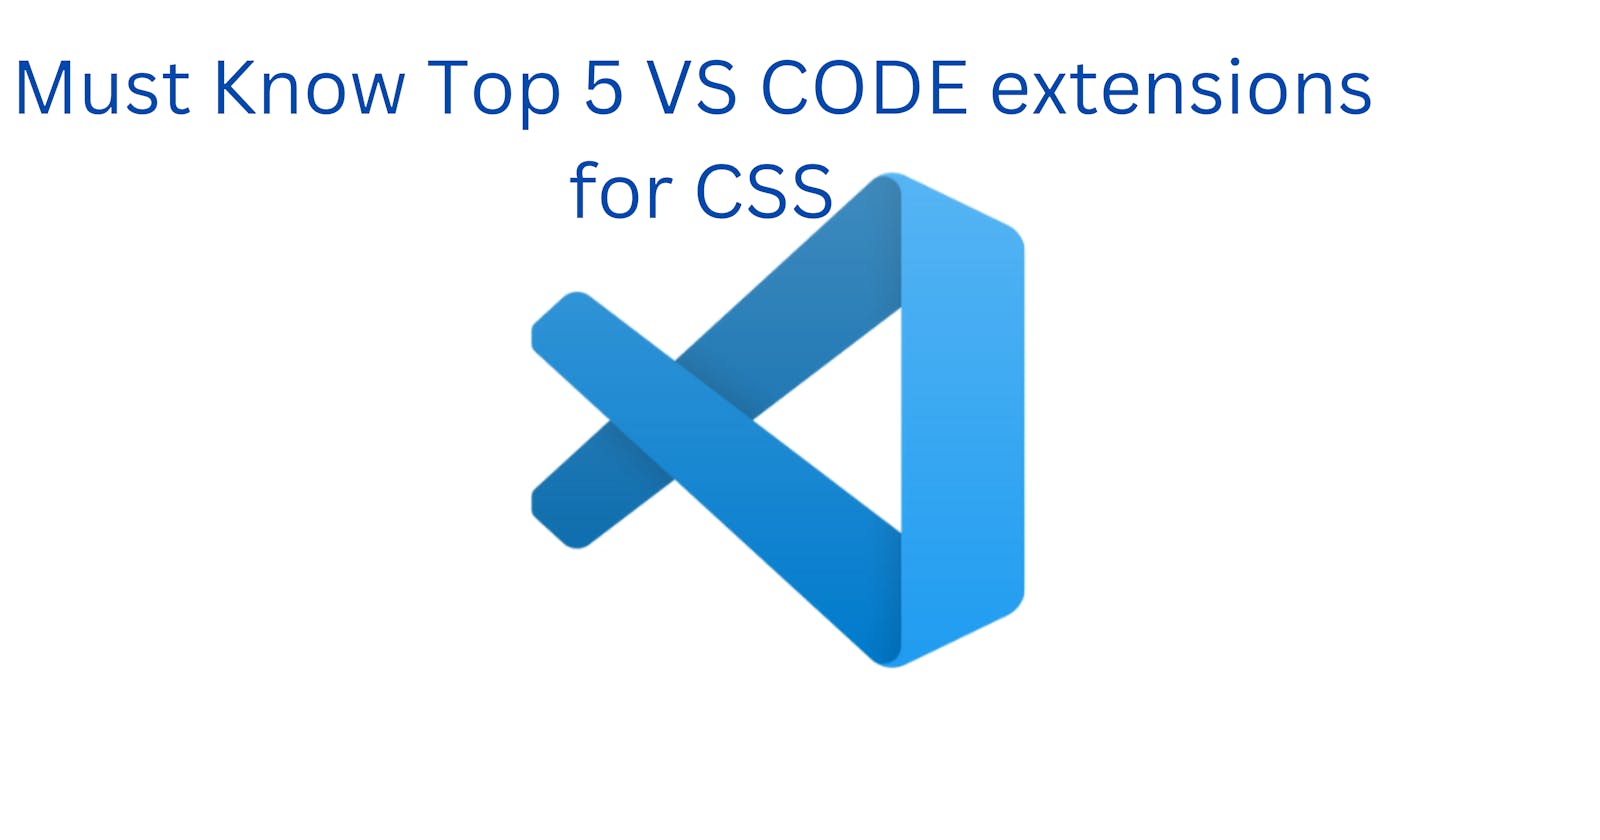 Must Know Top 5 VS CODE extensions for CSS